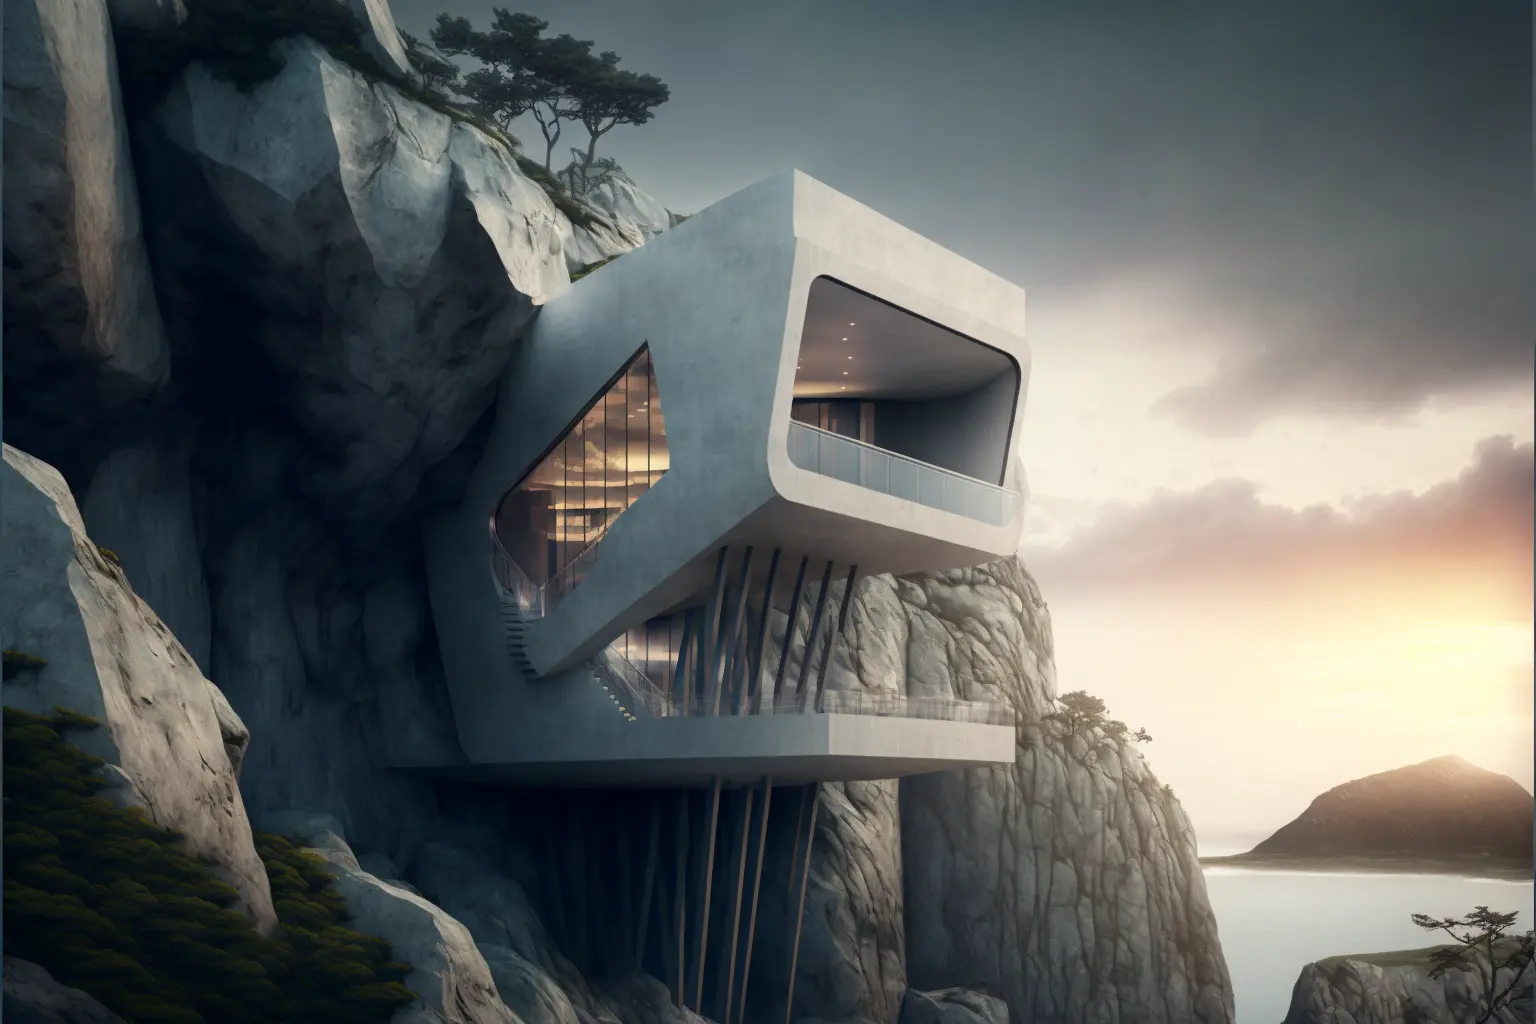 hotel designed by Ando Tadao, organic, embed into cliffside, architectural photography, style of archillect, futurism, modernist architecture